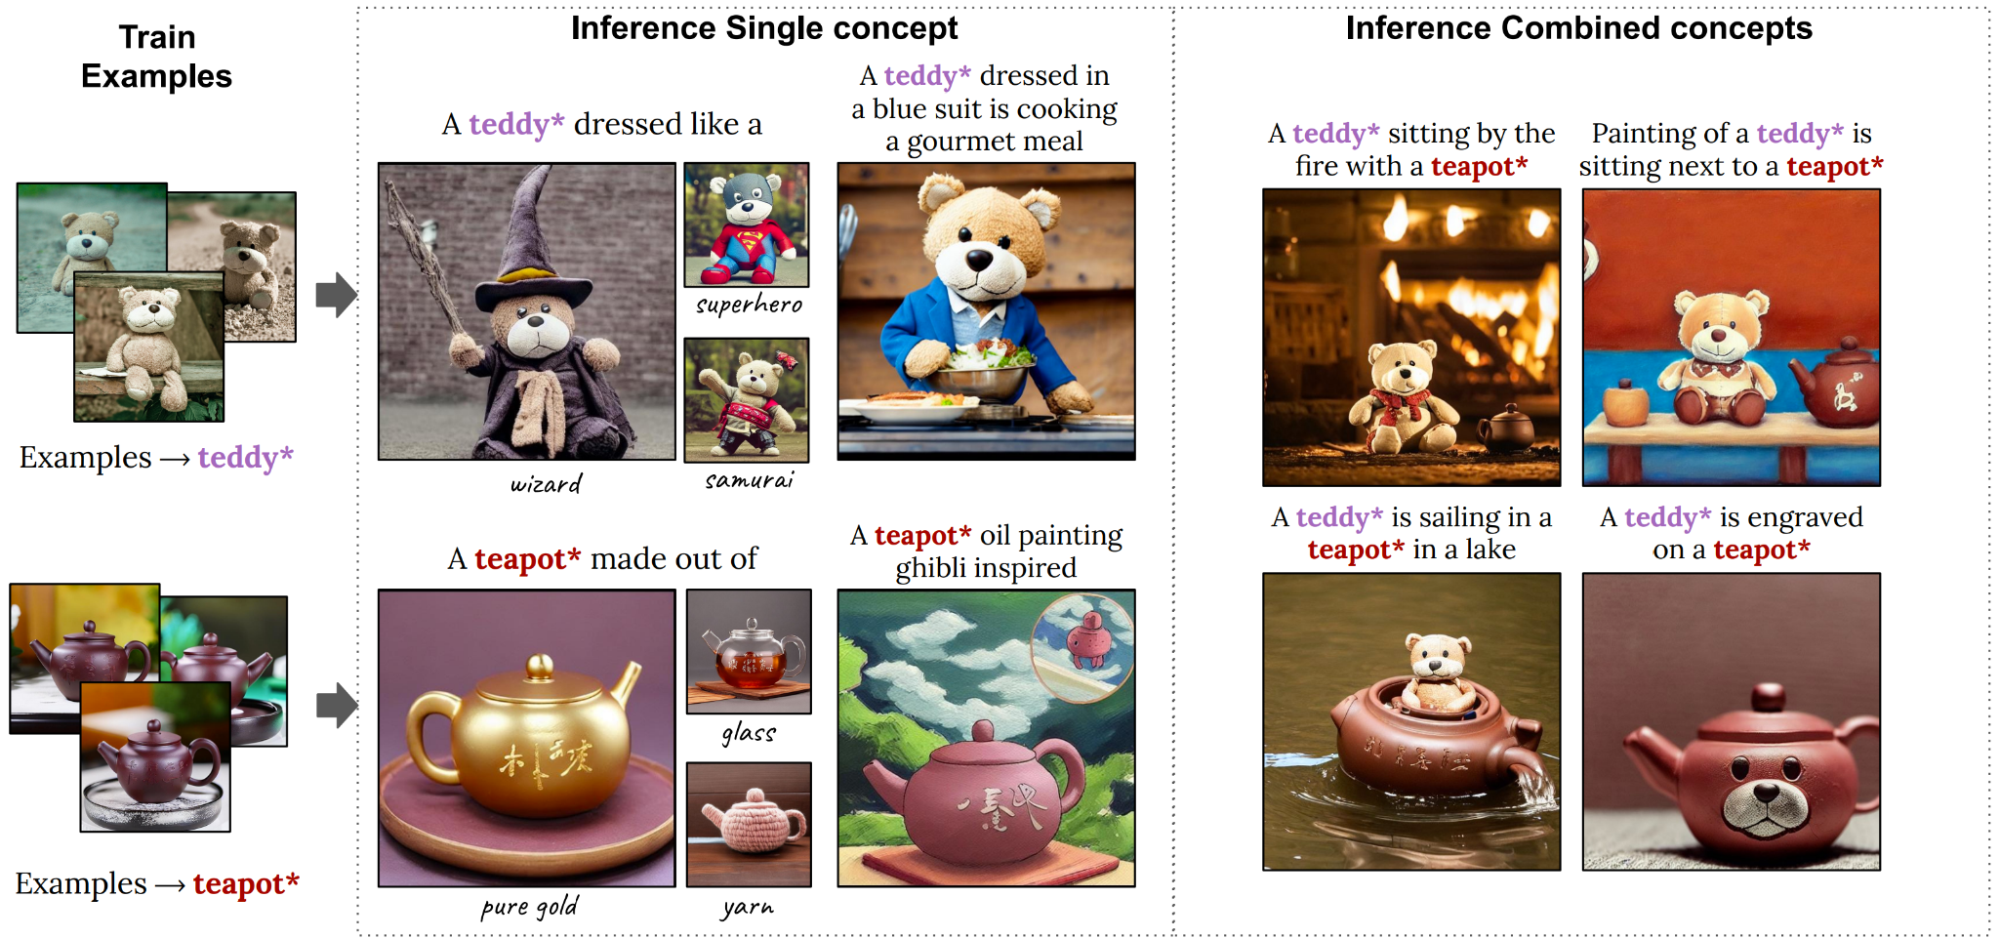 Examples of high-quality personalized generated images. Left: personalized  concepts, Teddy* and Teapot*. Right: The two concepts that were learned separately are combined in various ways, like teddy* sails in a teapot*